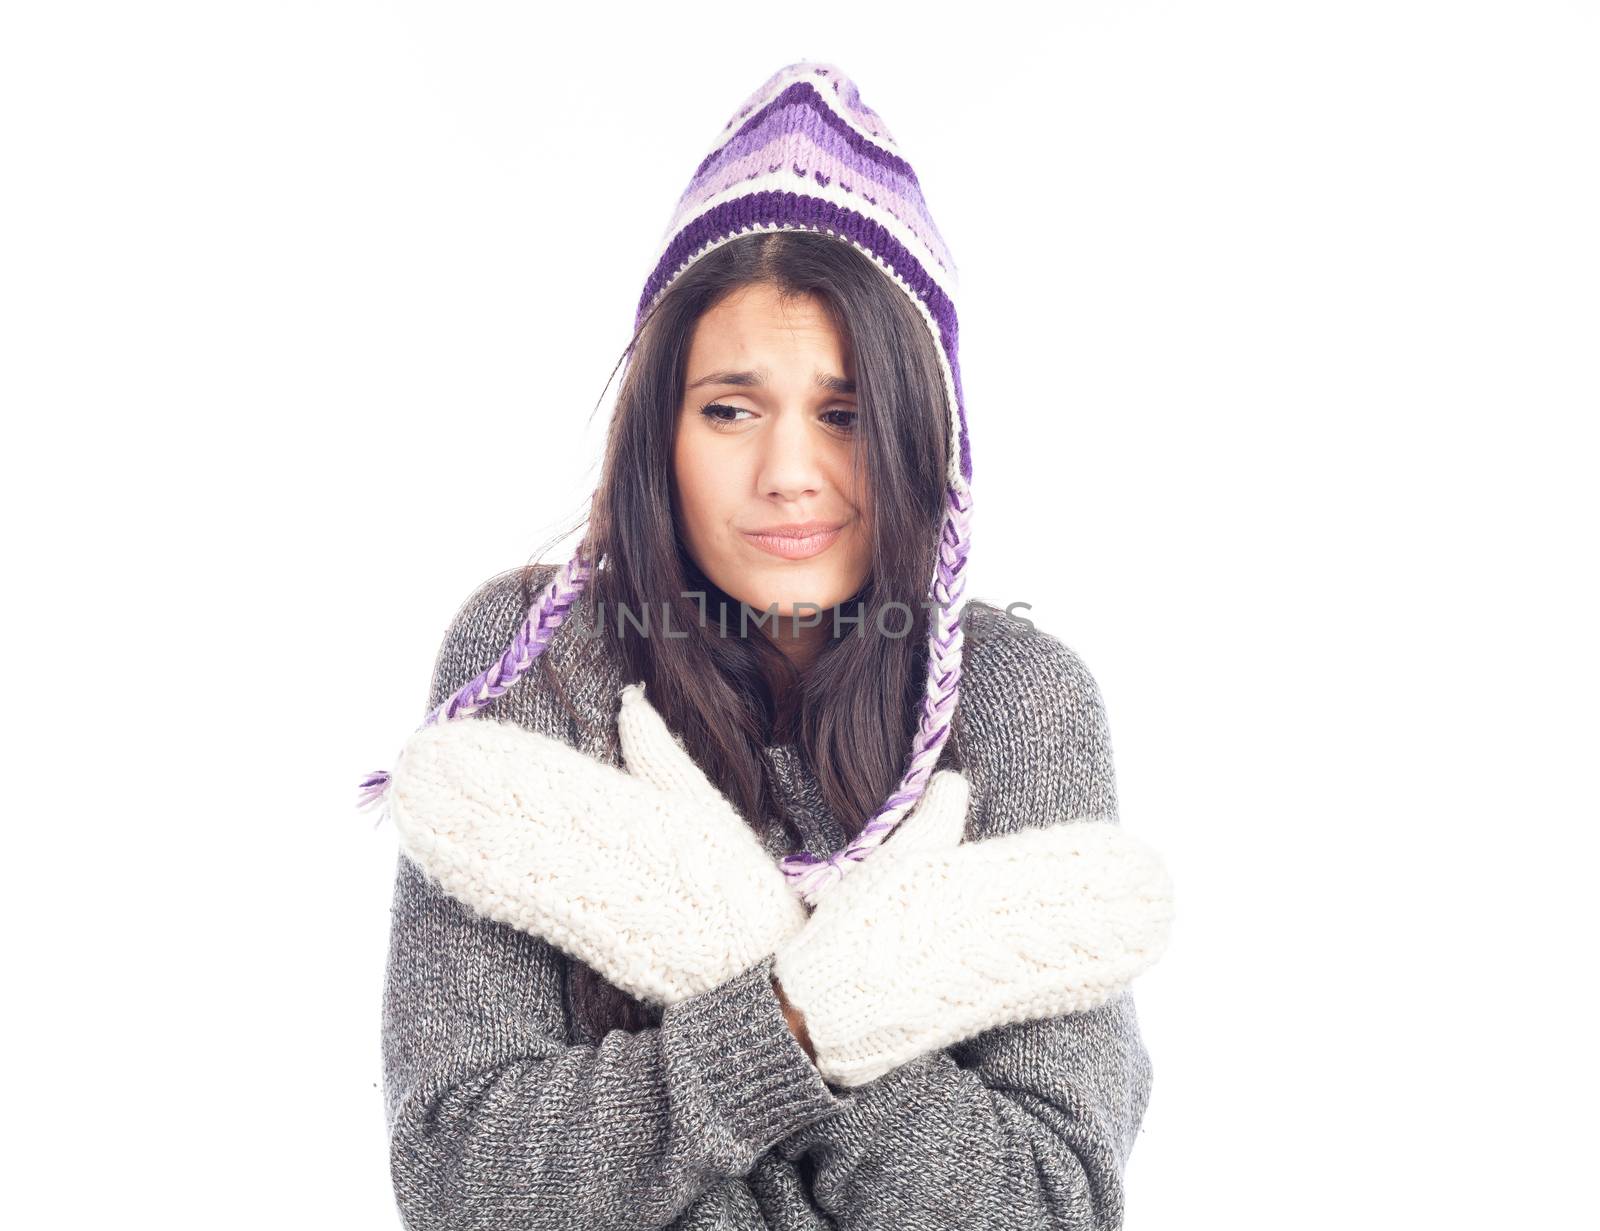 pretty brunette woman with a woolen Peruvian hat a sweater and gloves that has cold